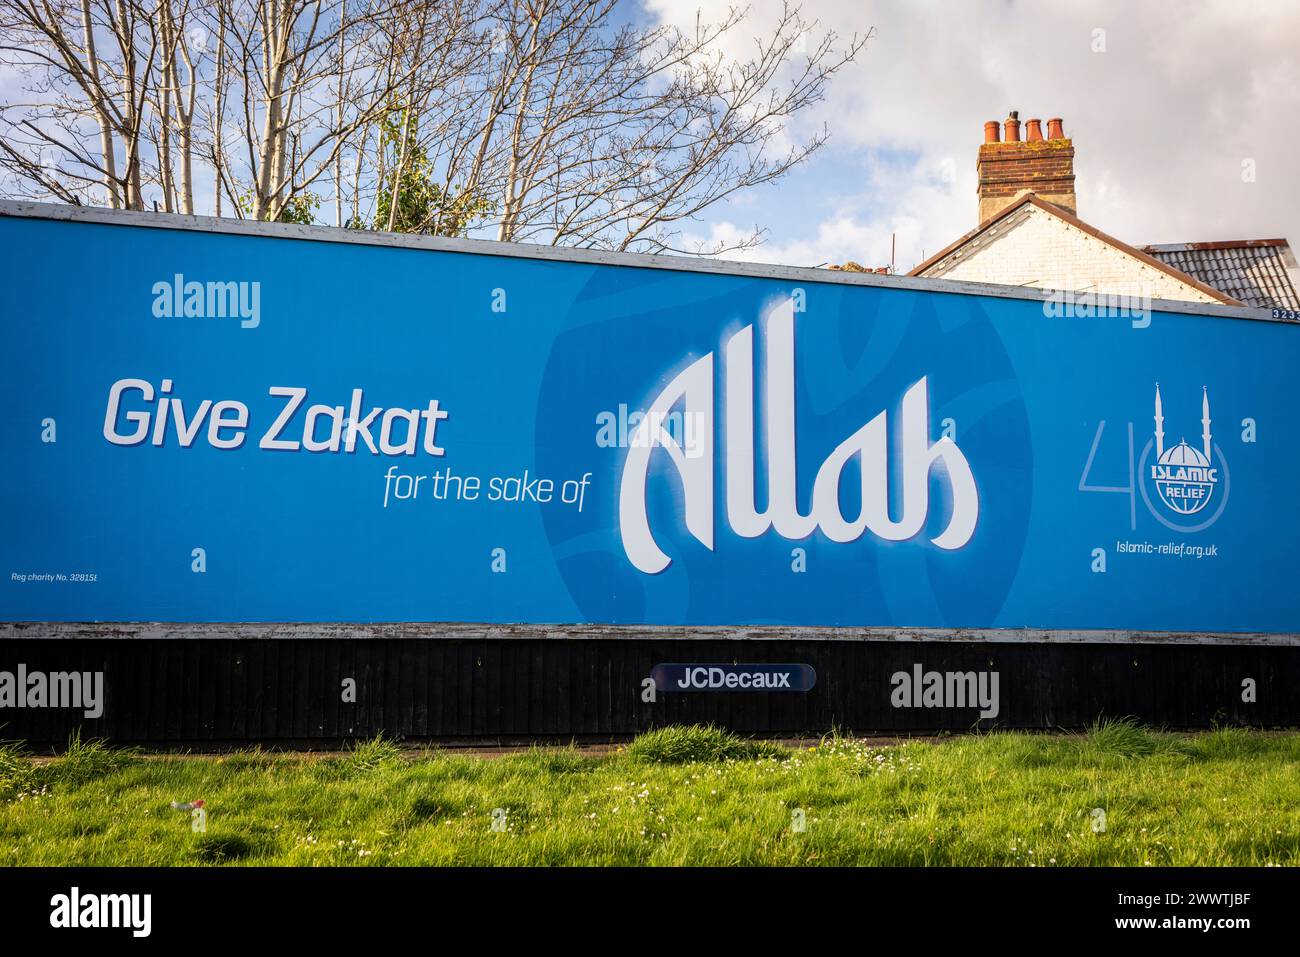 Billboard poster advertising for the Islamic Relief charity to make / give a Zakat donation for the sake of Allah, Southampton, Hampshire, England, UK Stock Photo